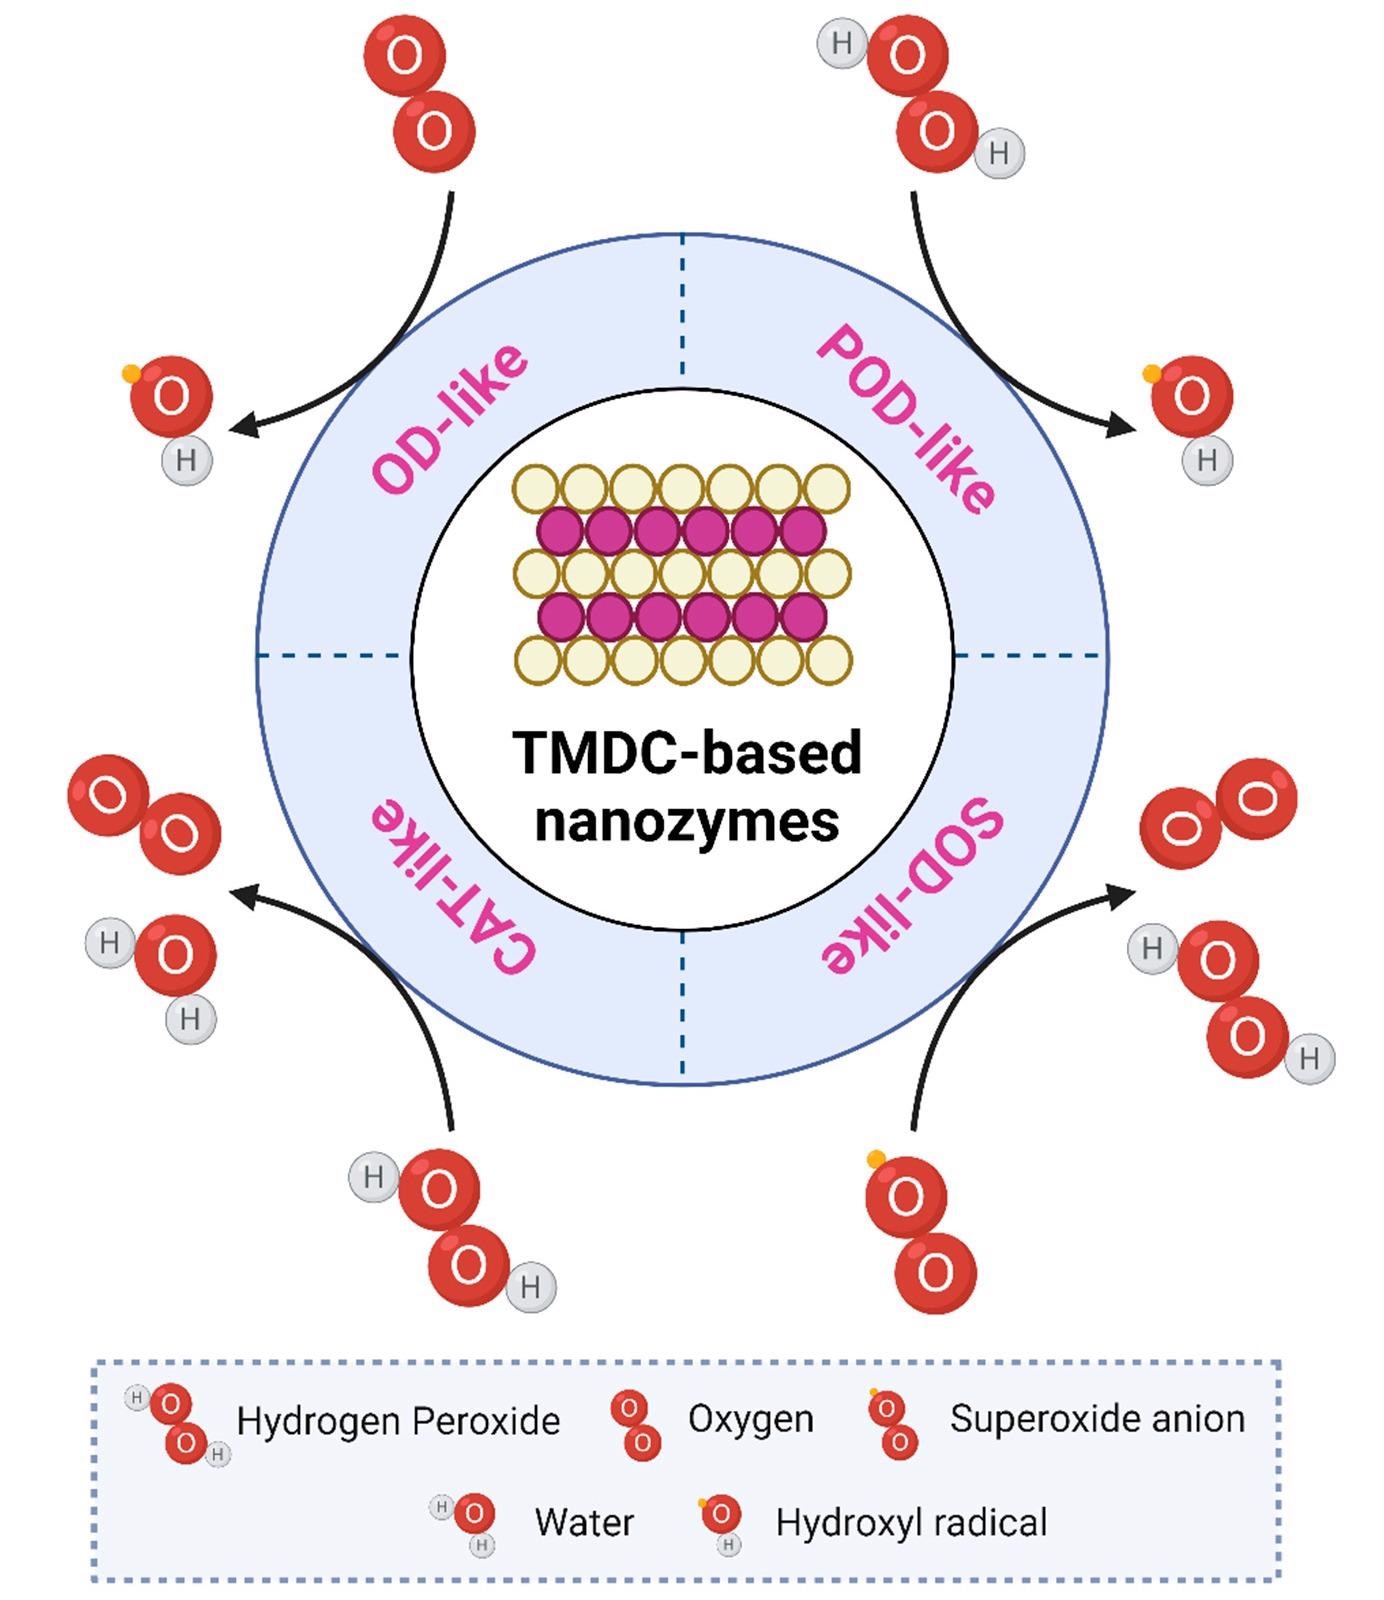 Different enzymatic activities and their mechanisms followed by TMDC-based NZs.